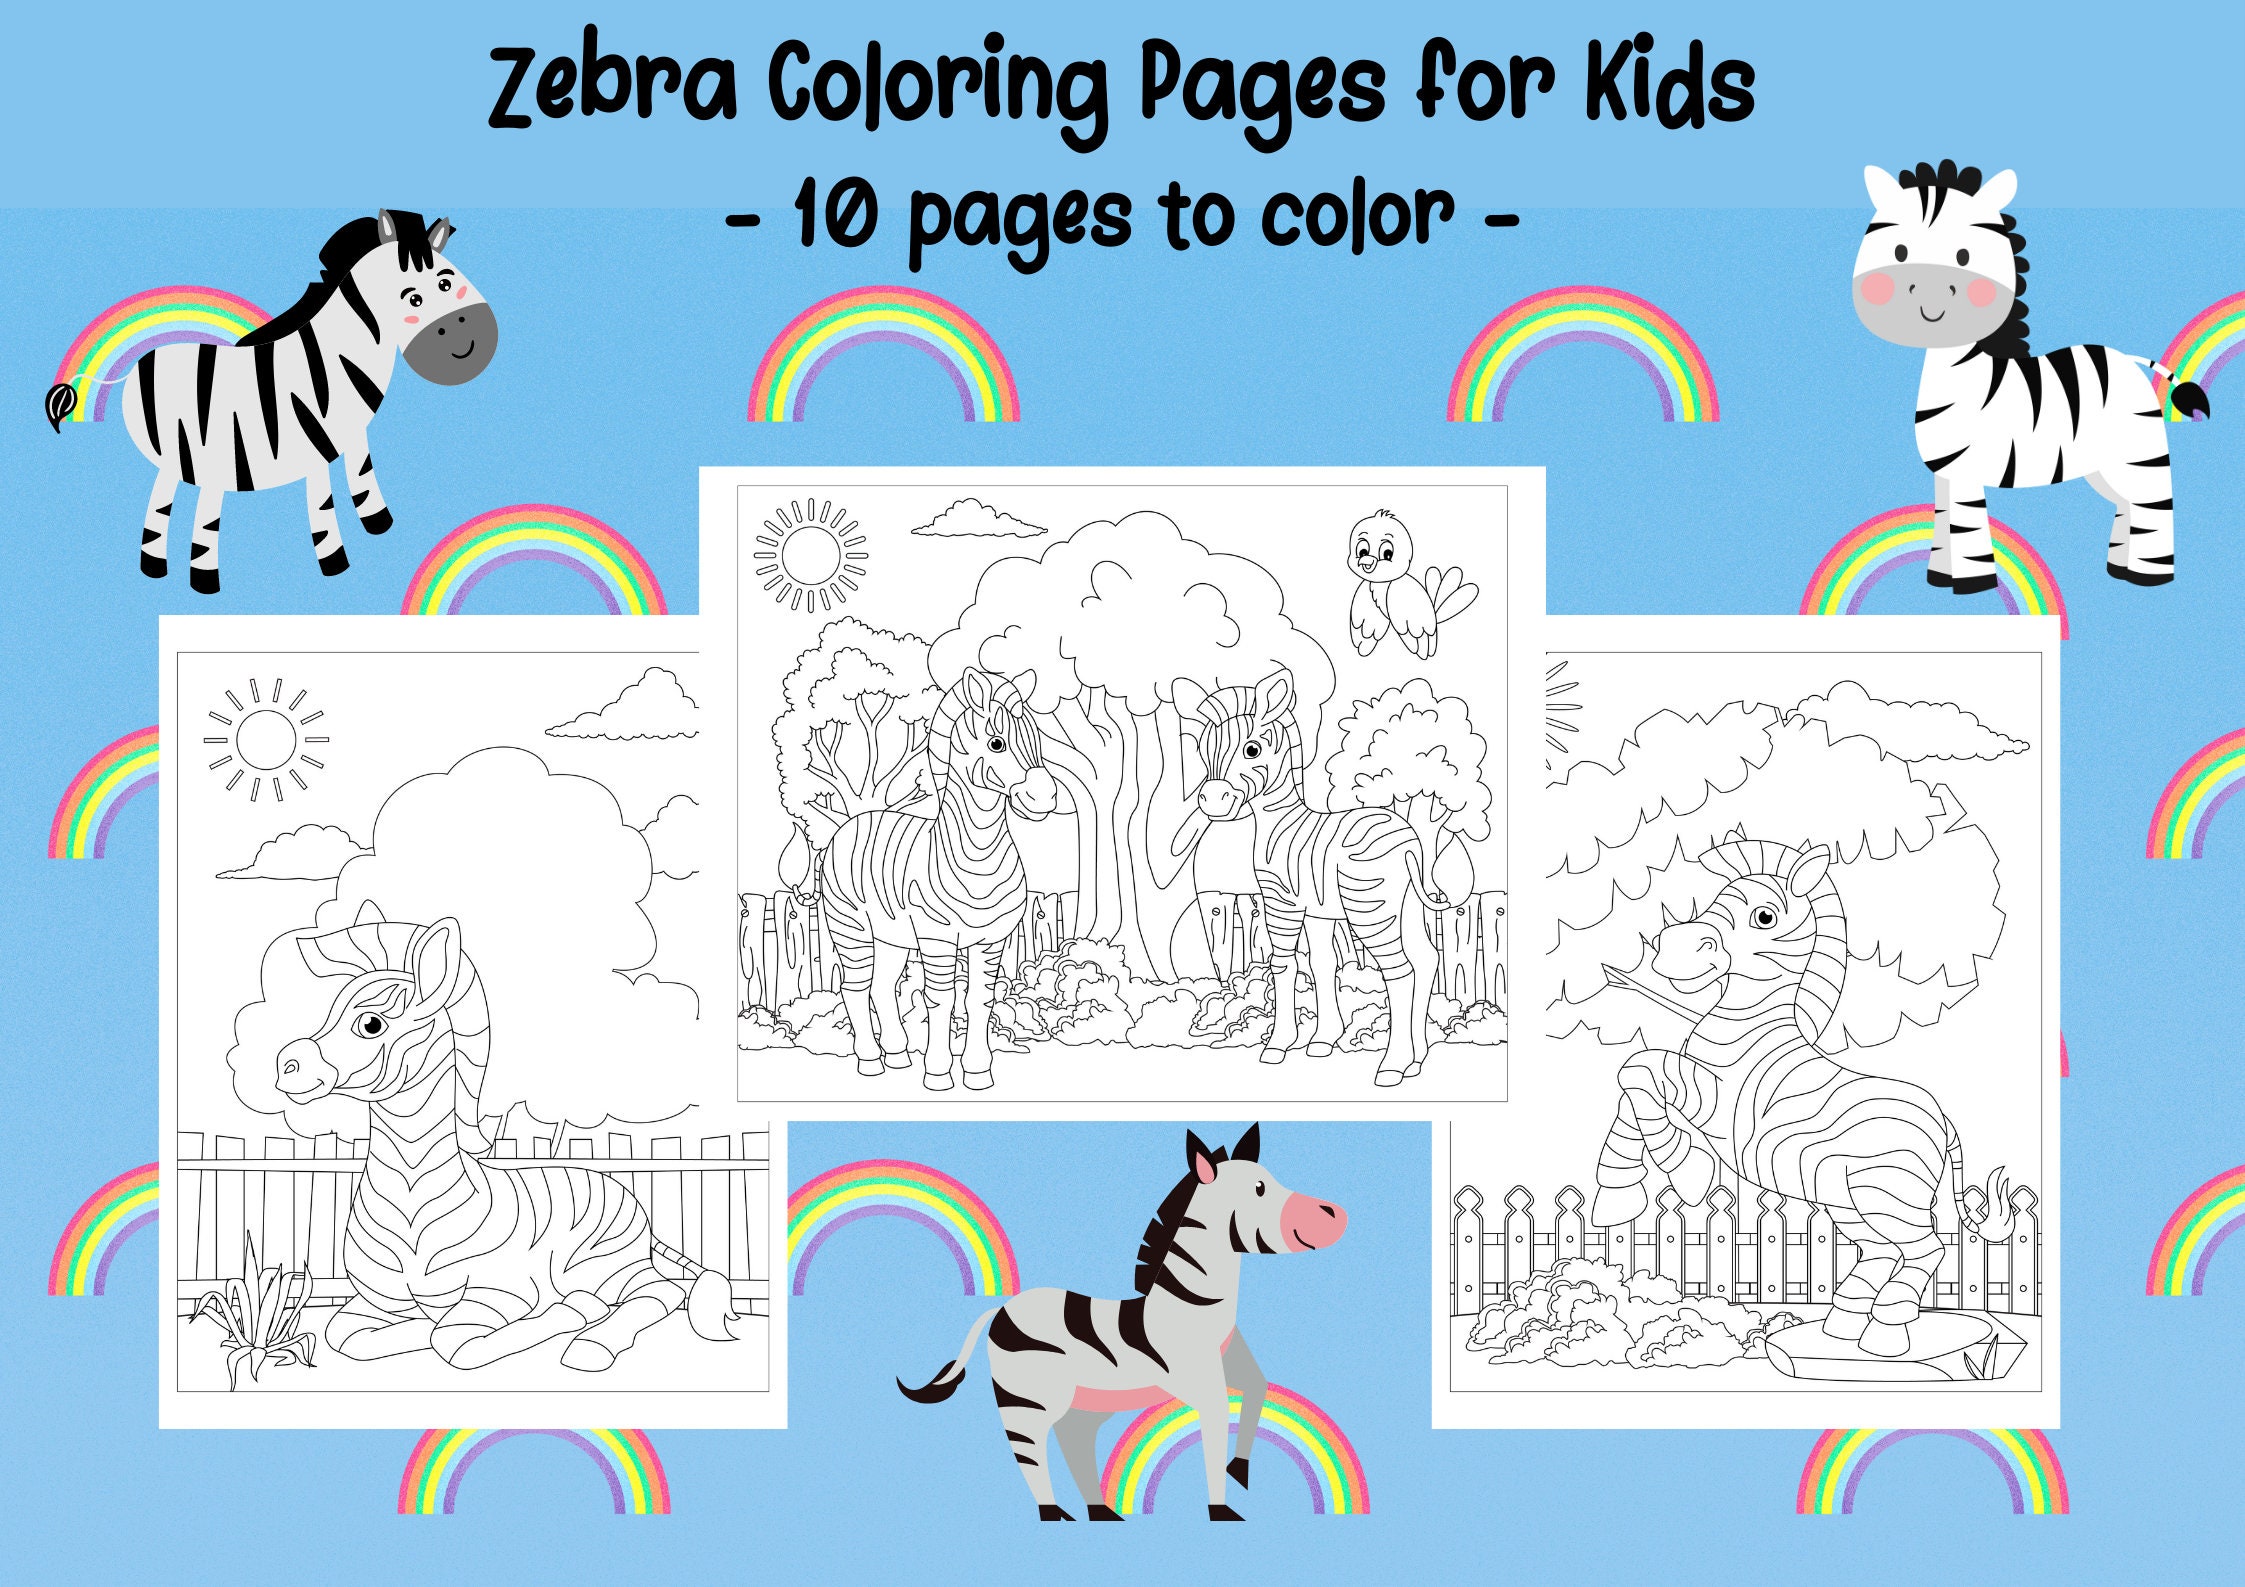 Zebra coloring pages bundle for kids boys and girls printable pages zebra coloring book zebra coloring sheets instant download